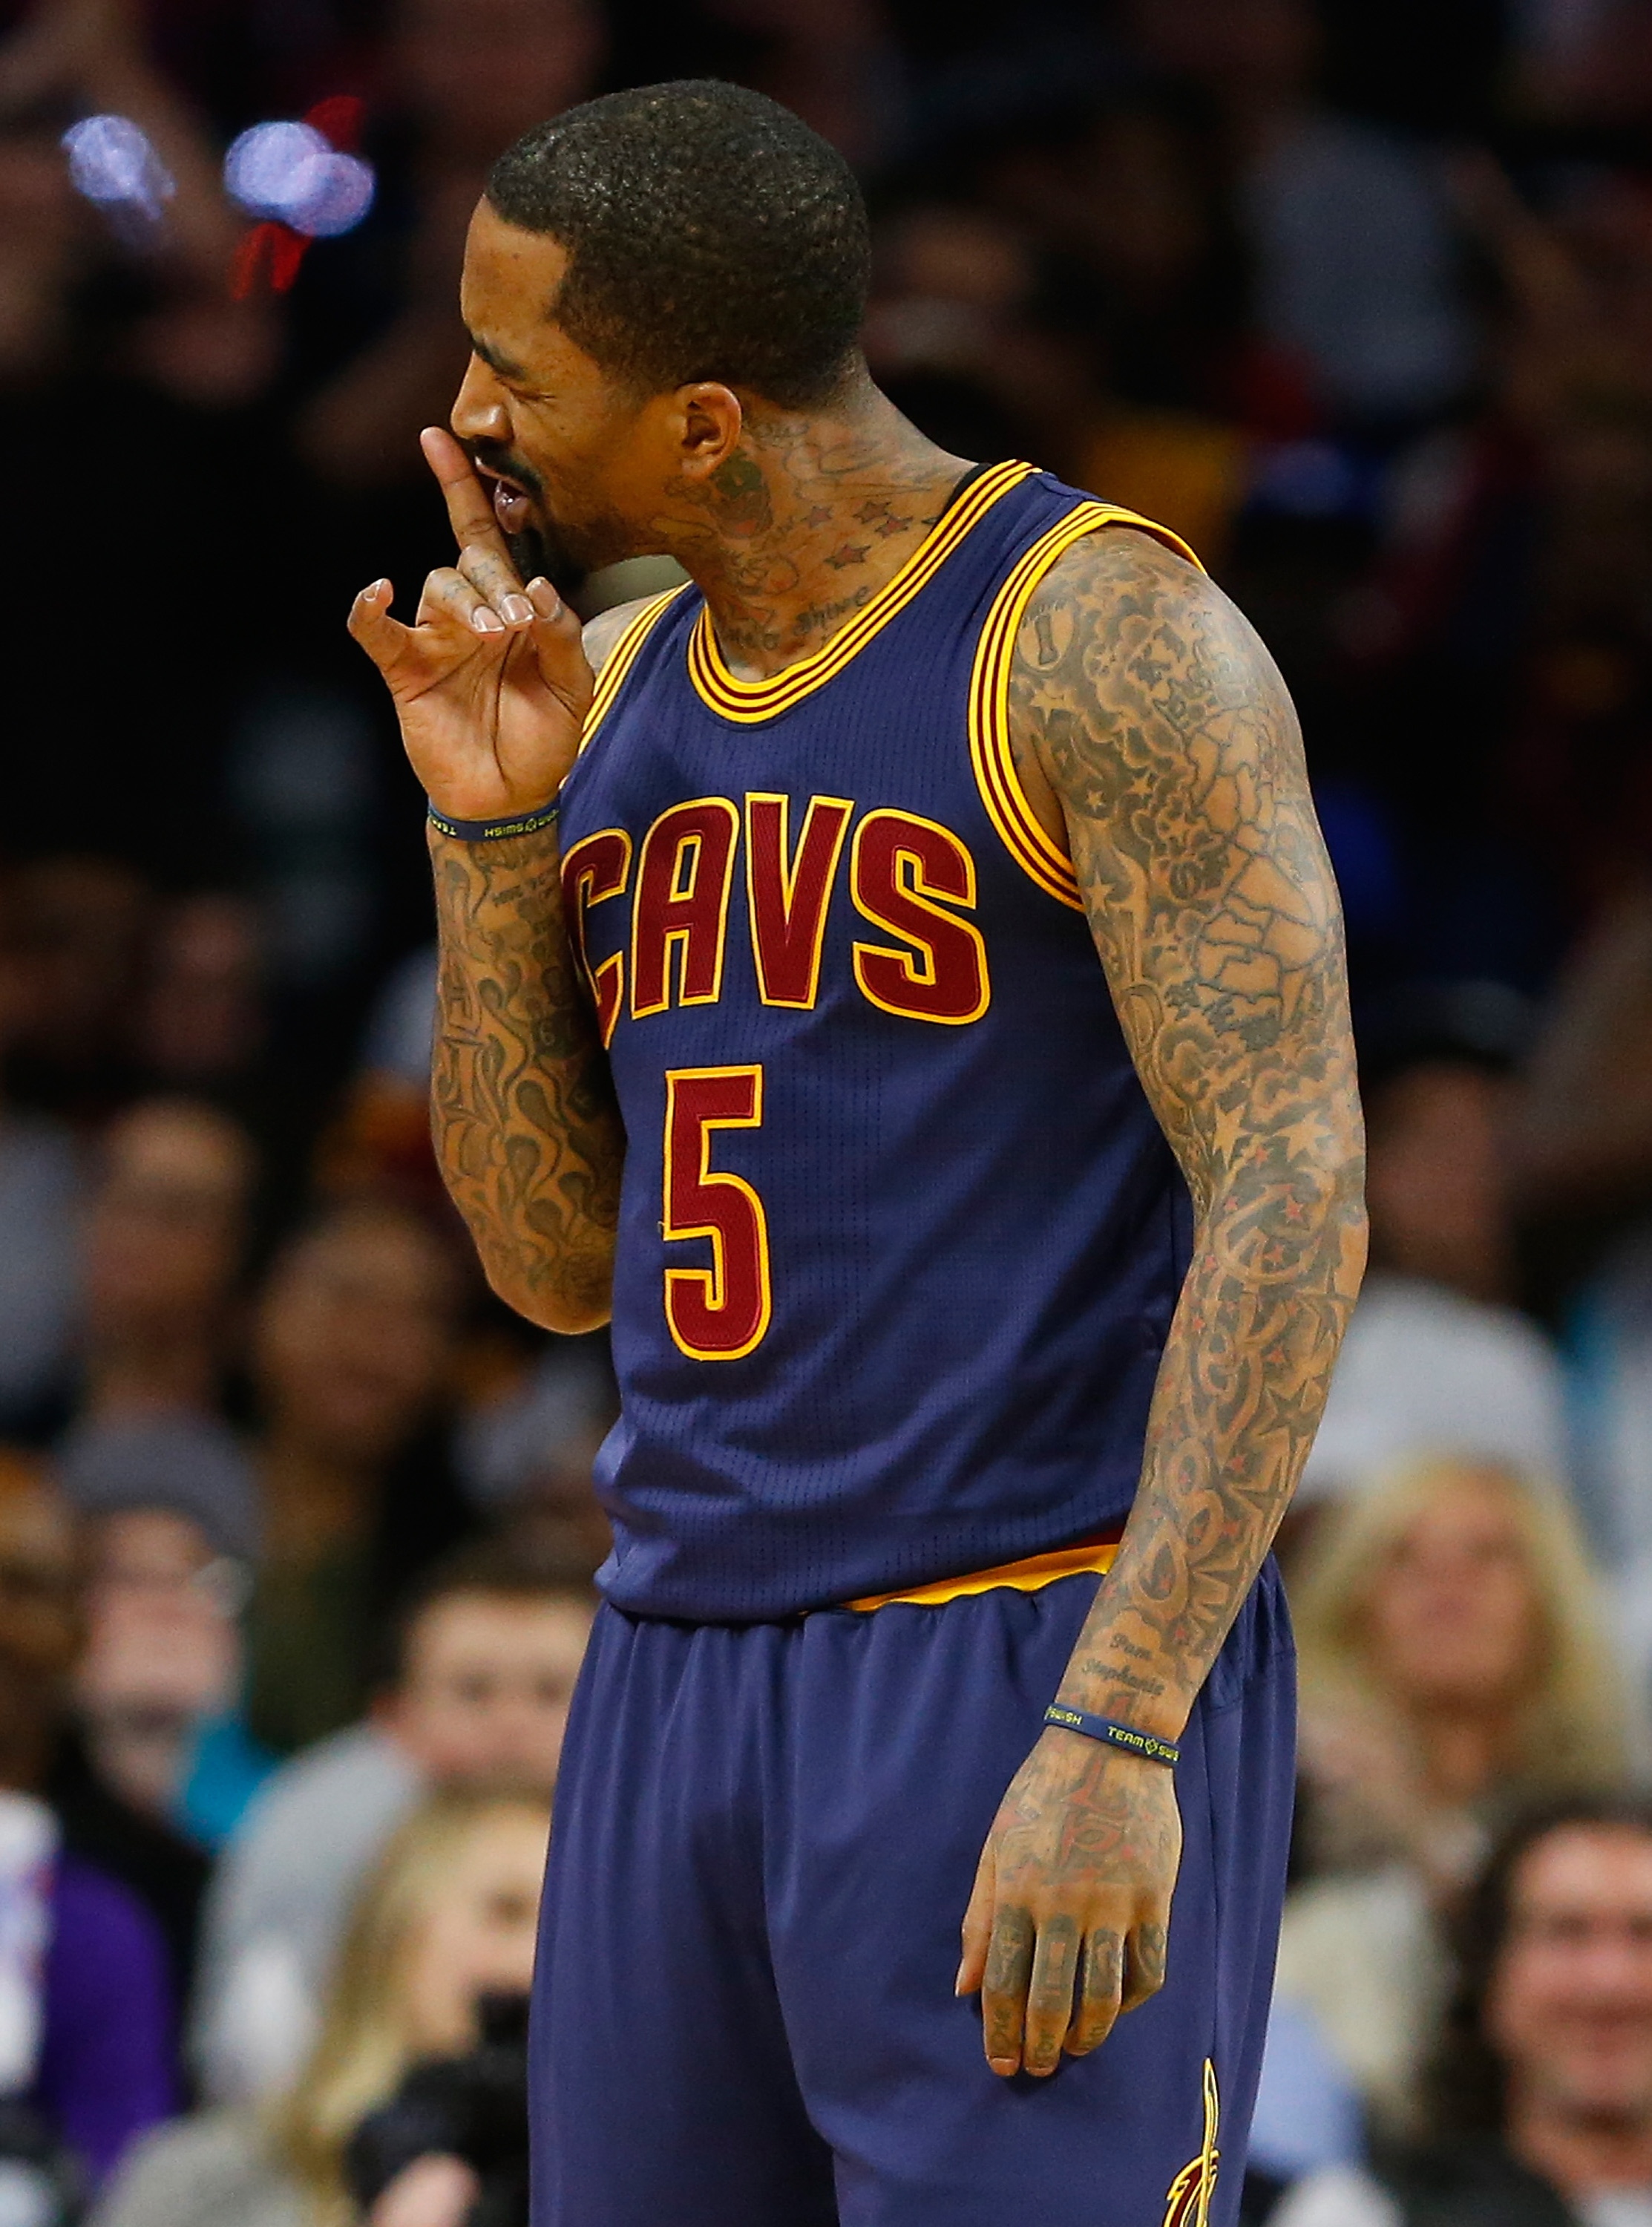 J.R. Smith asks his daughter to keep quiet. (Gregory Shamus/Getty Images)